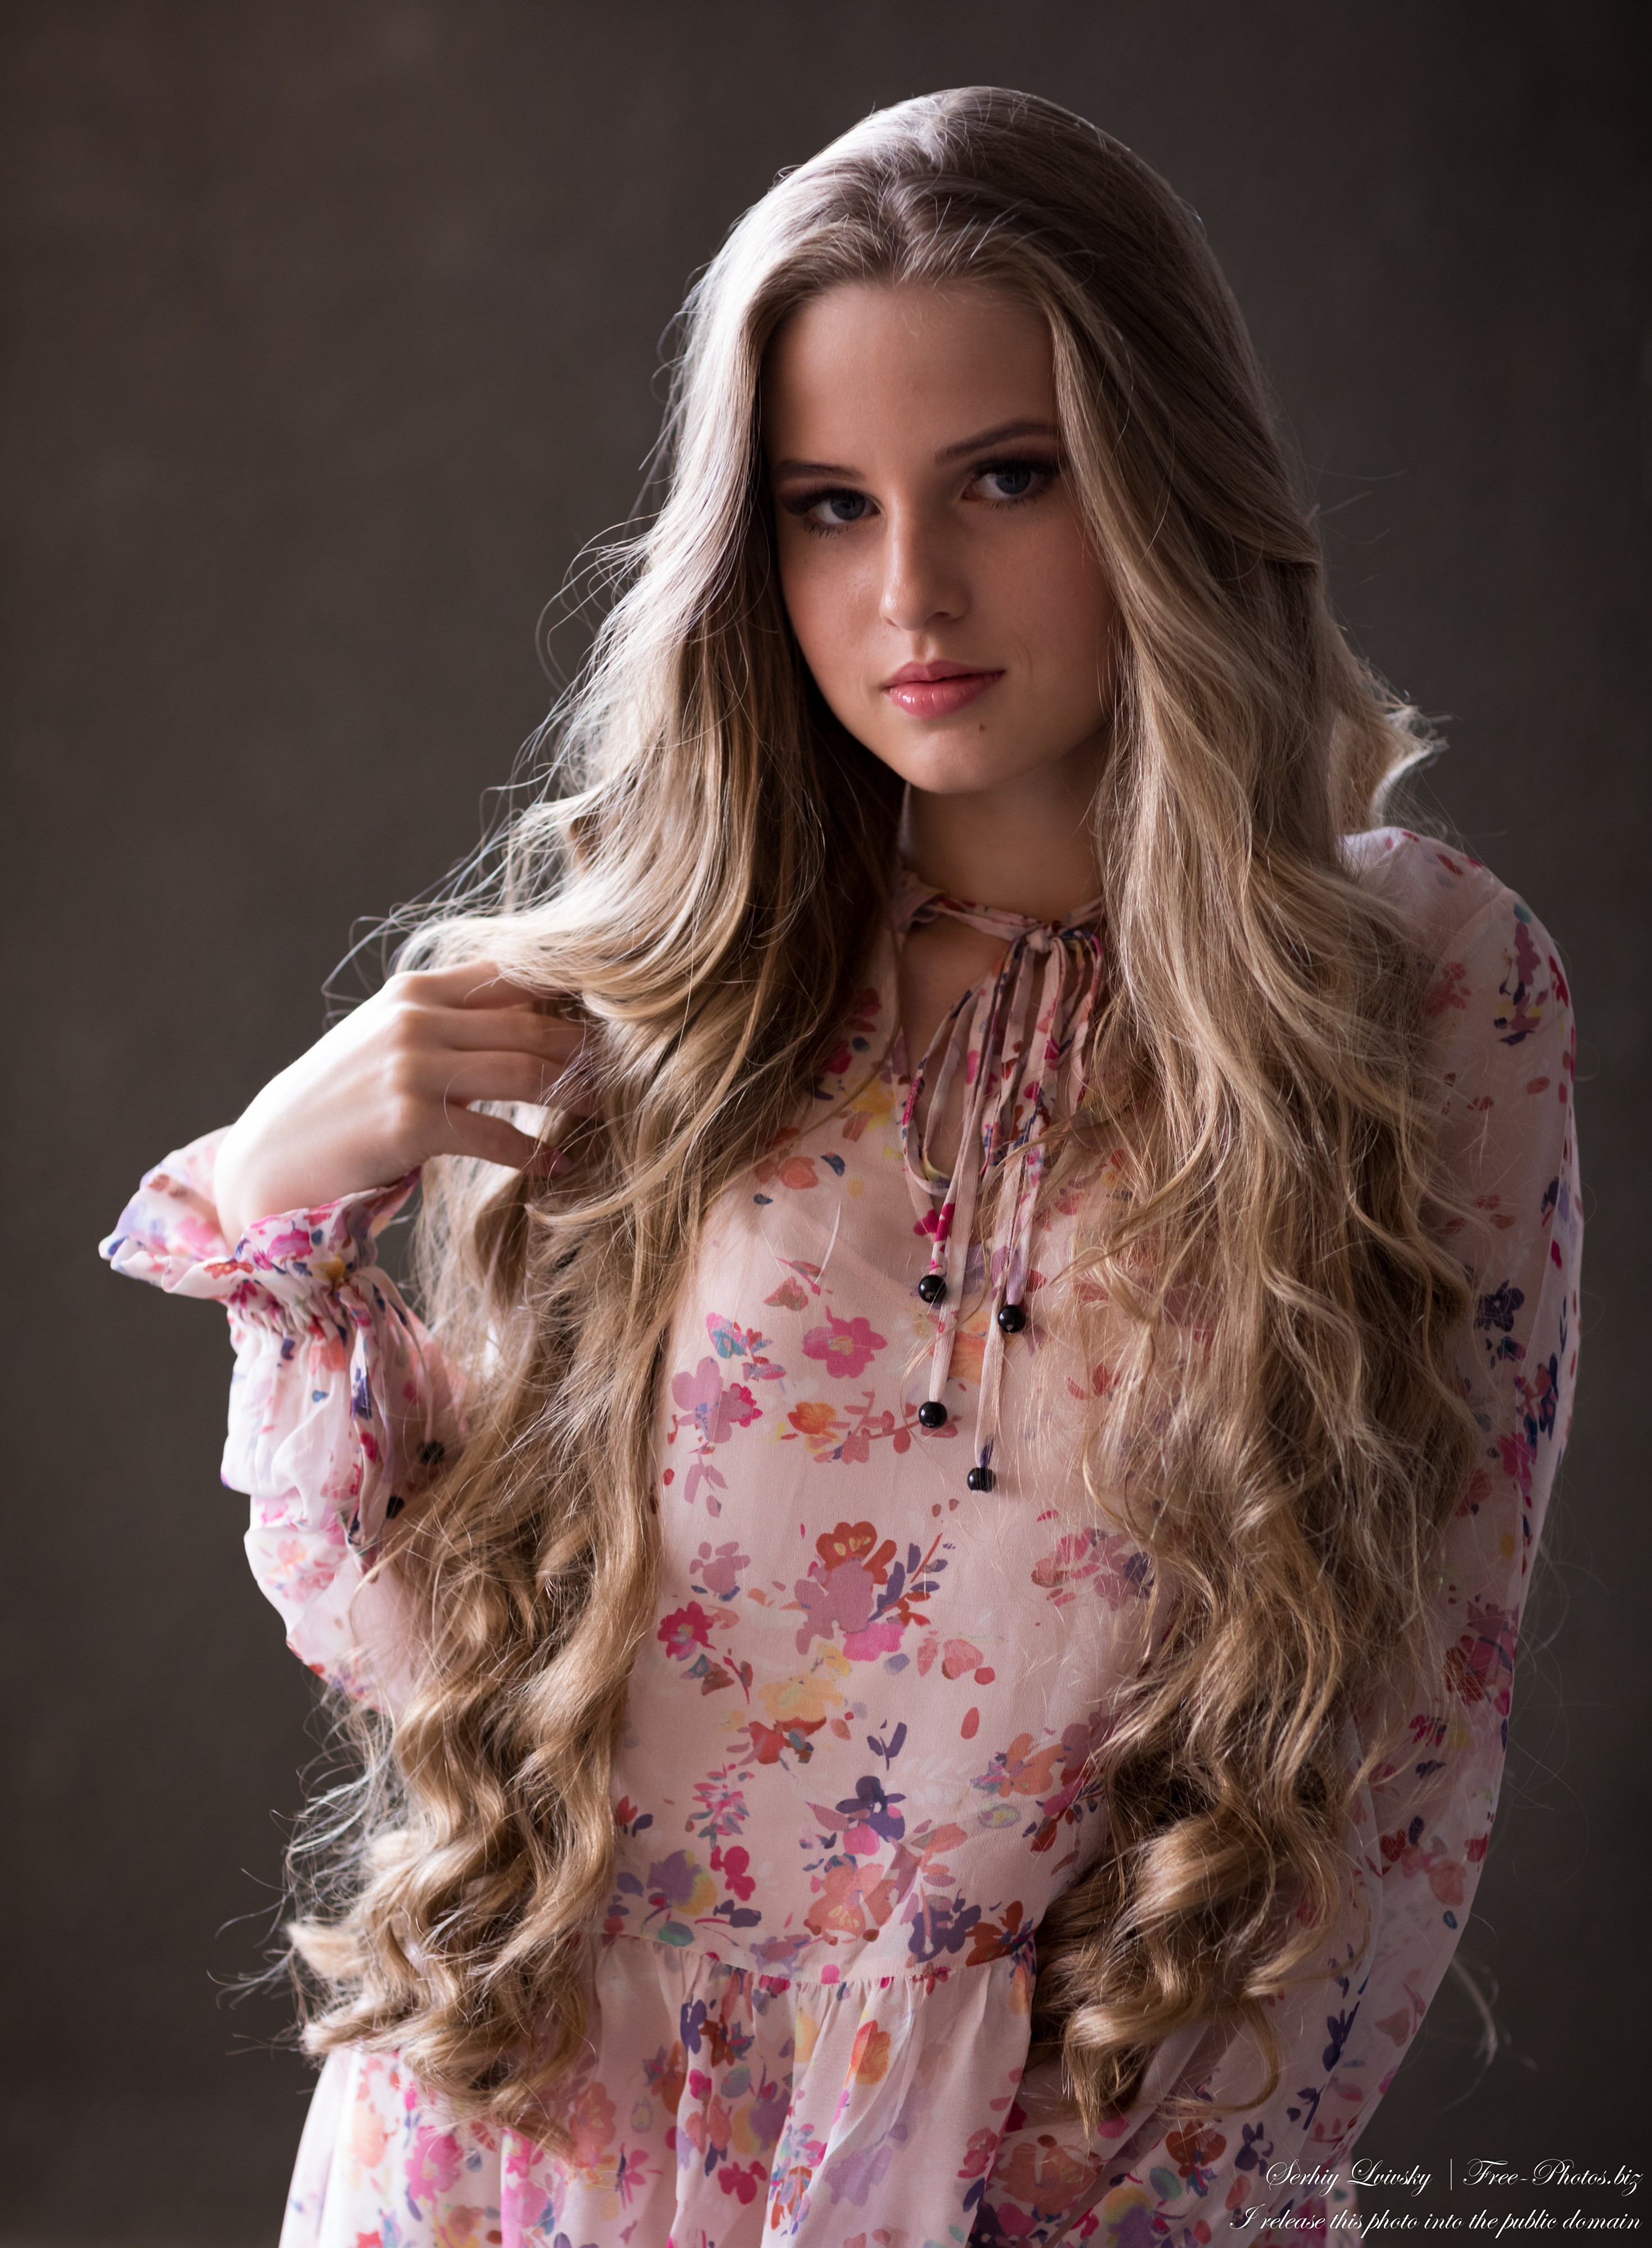 Diana - an 18-year-old natural blonde girl photographed by Serhiy Lvivsky in July 2020, picture 10